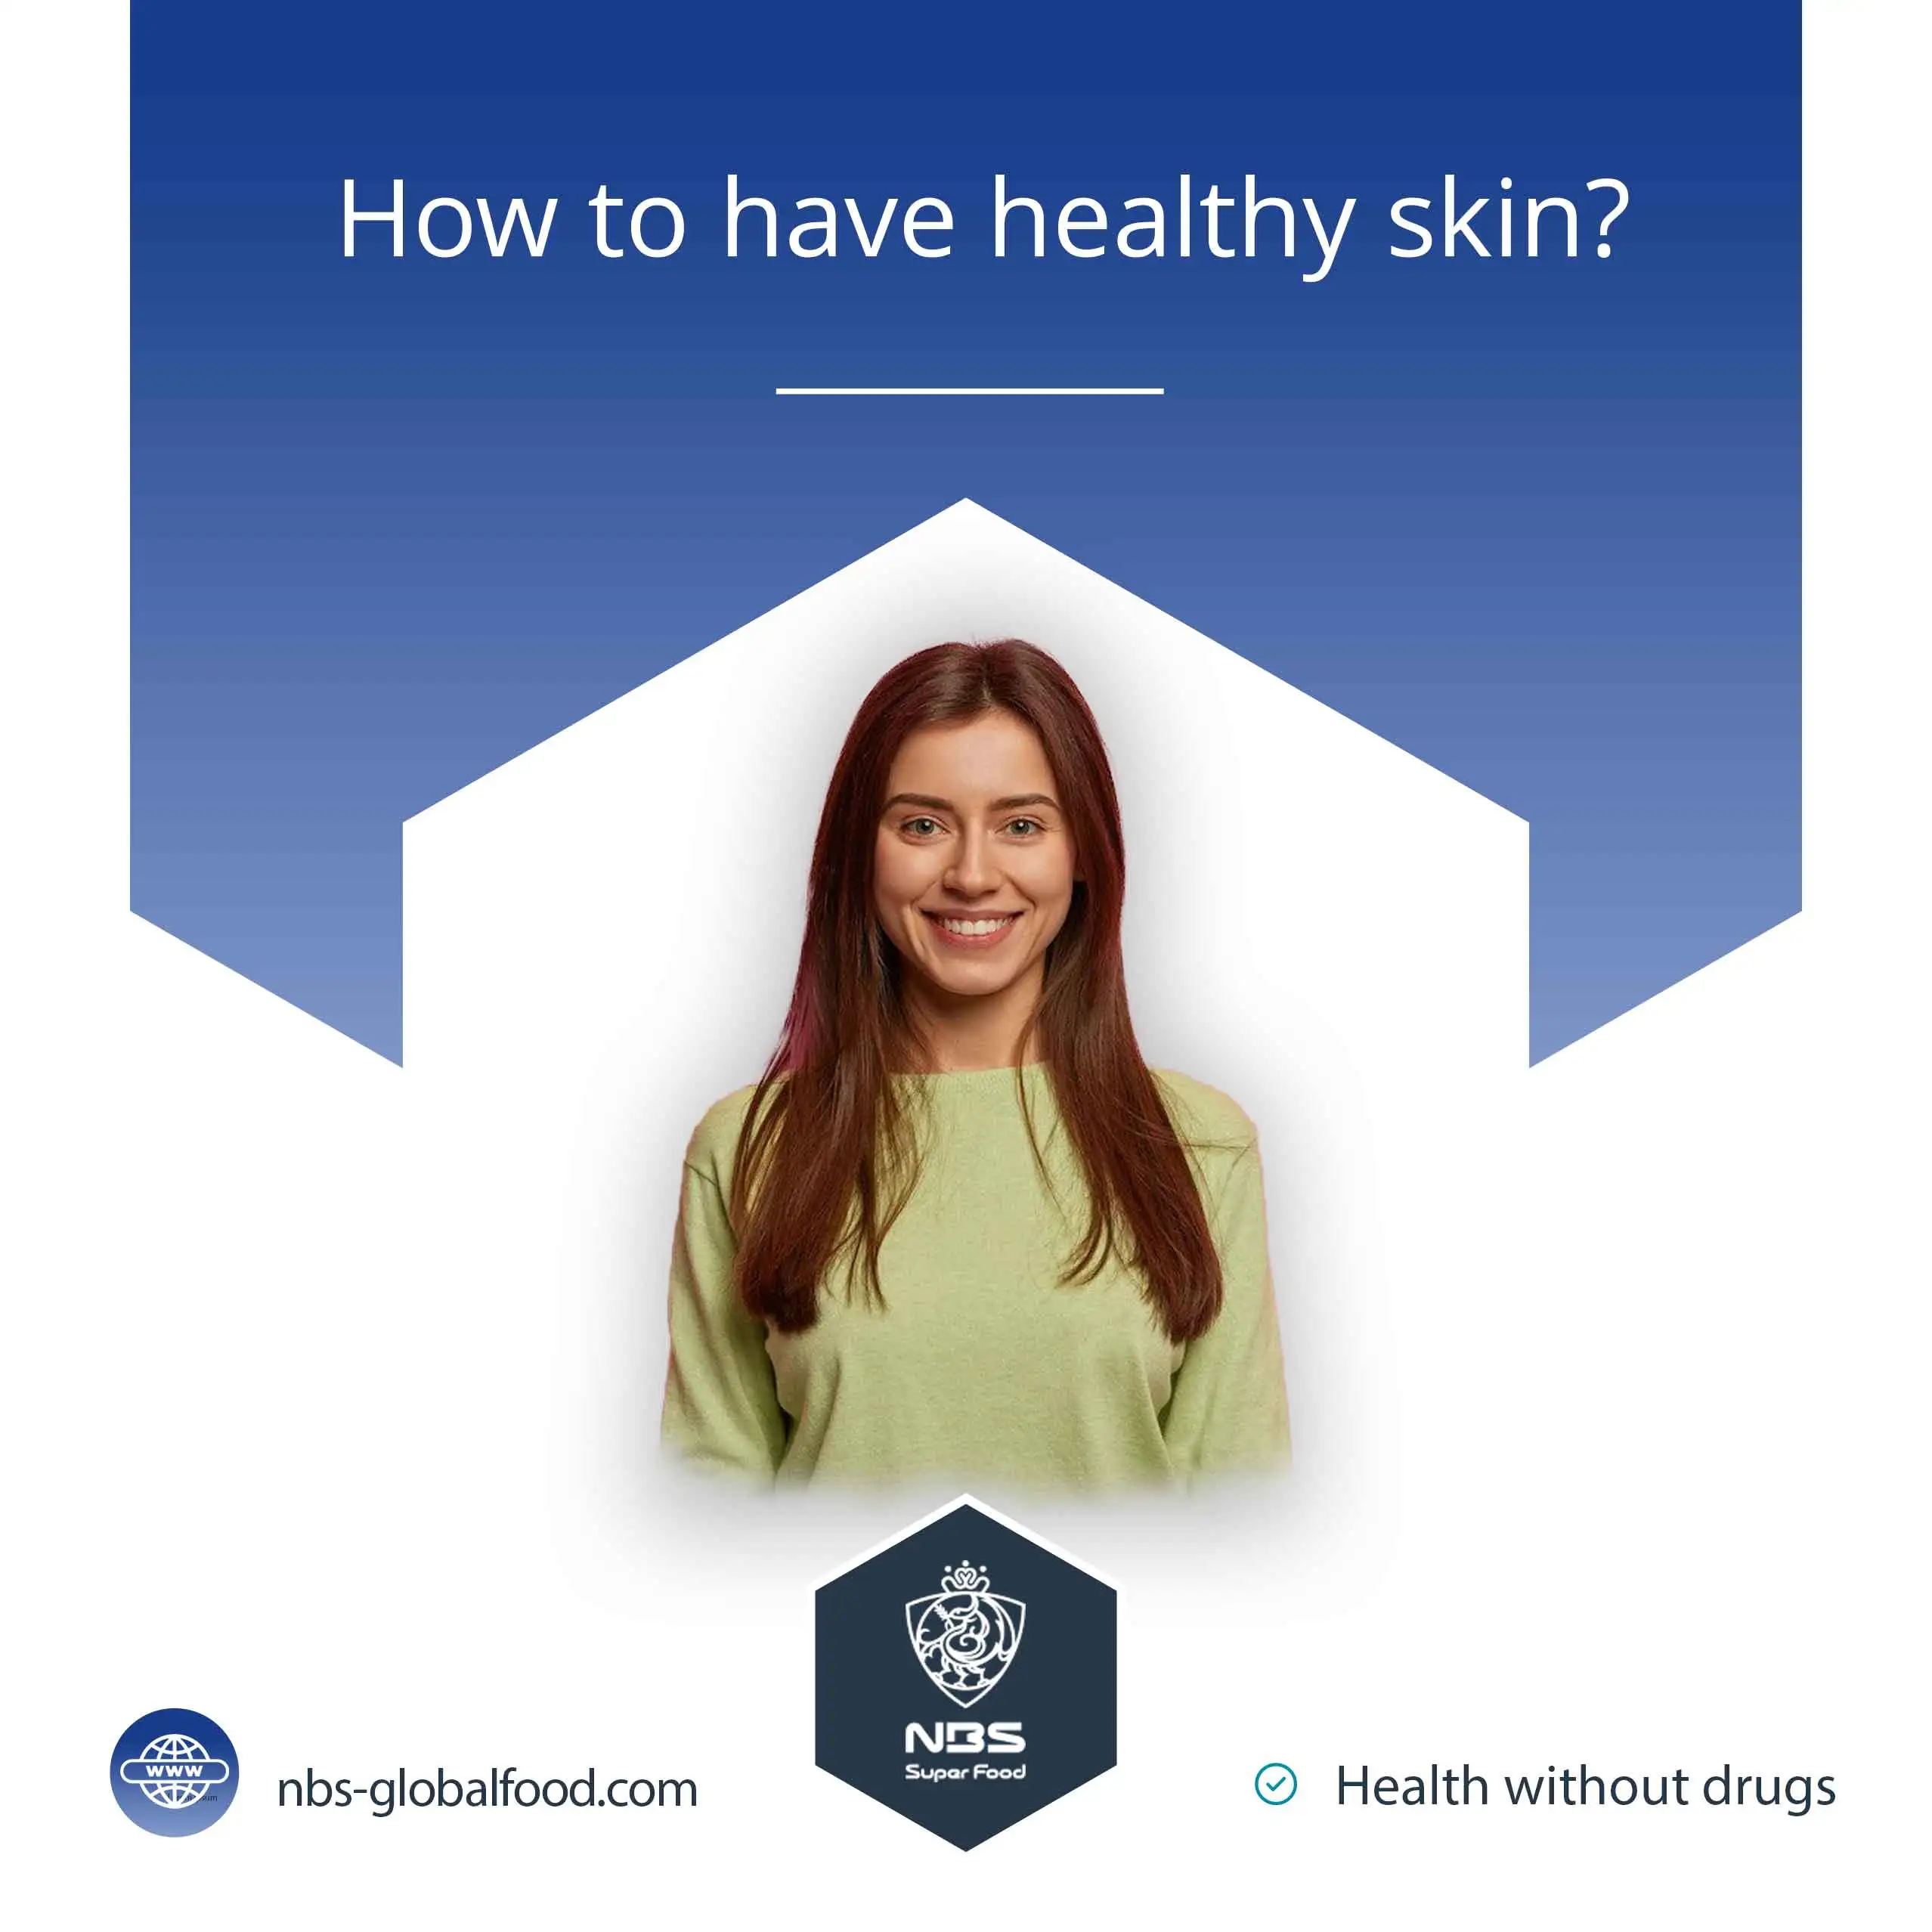 How to have healthy skin?